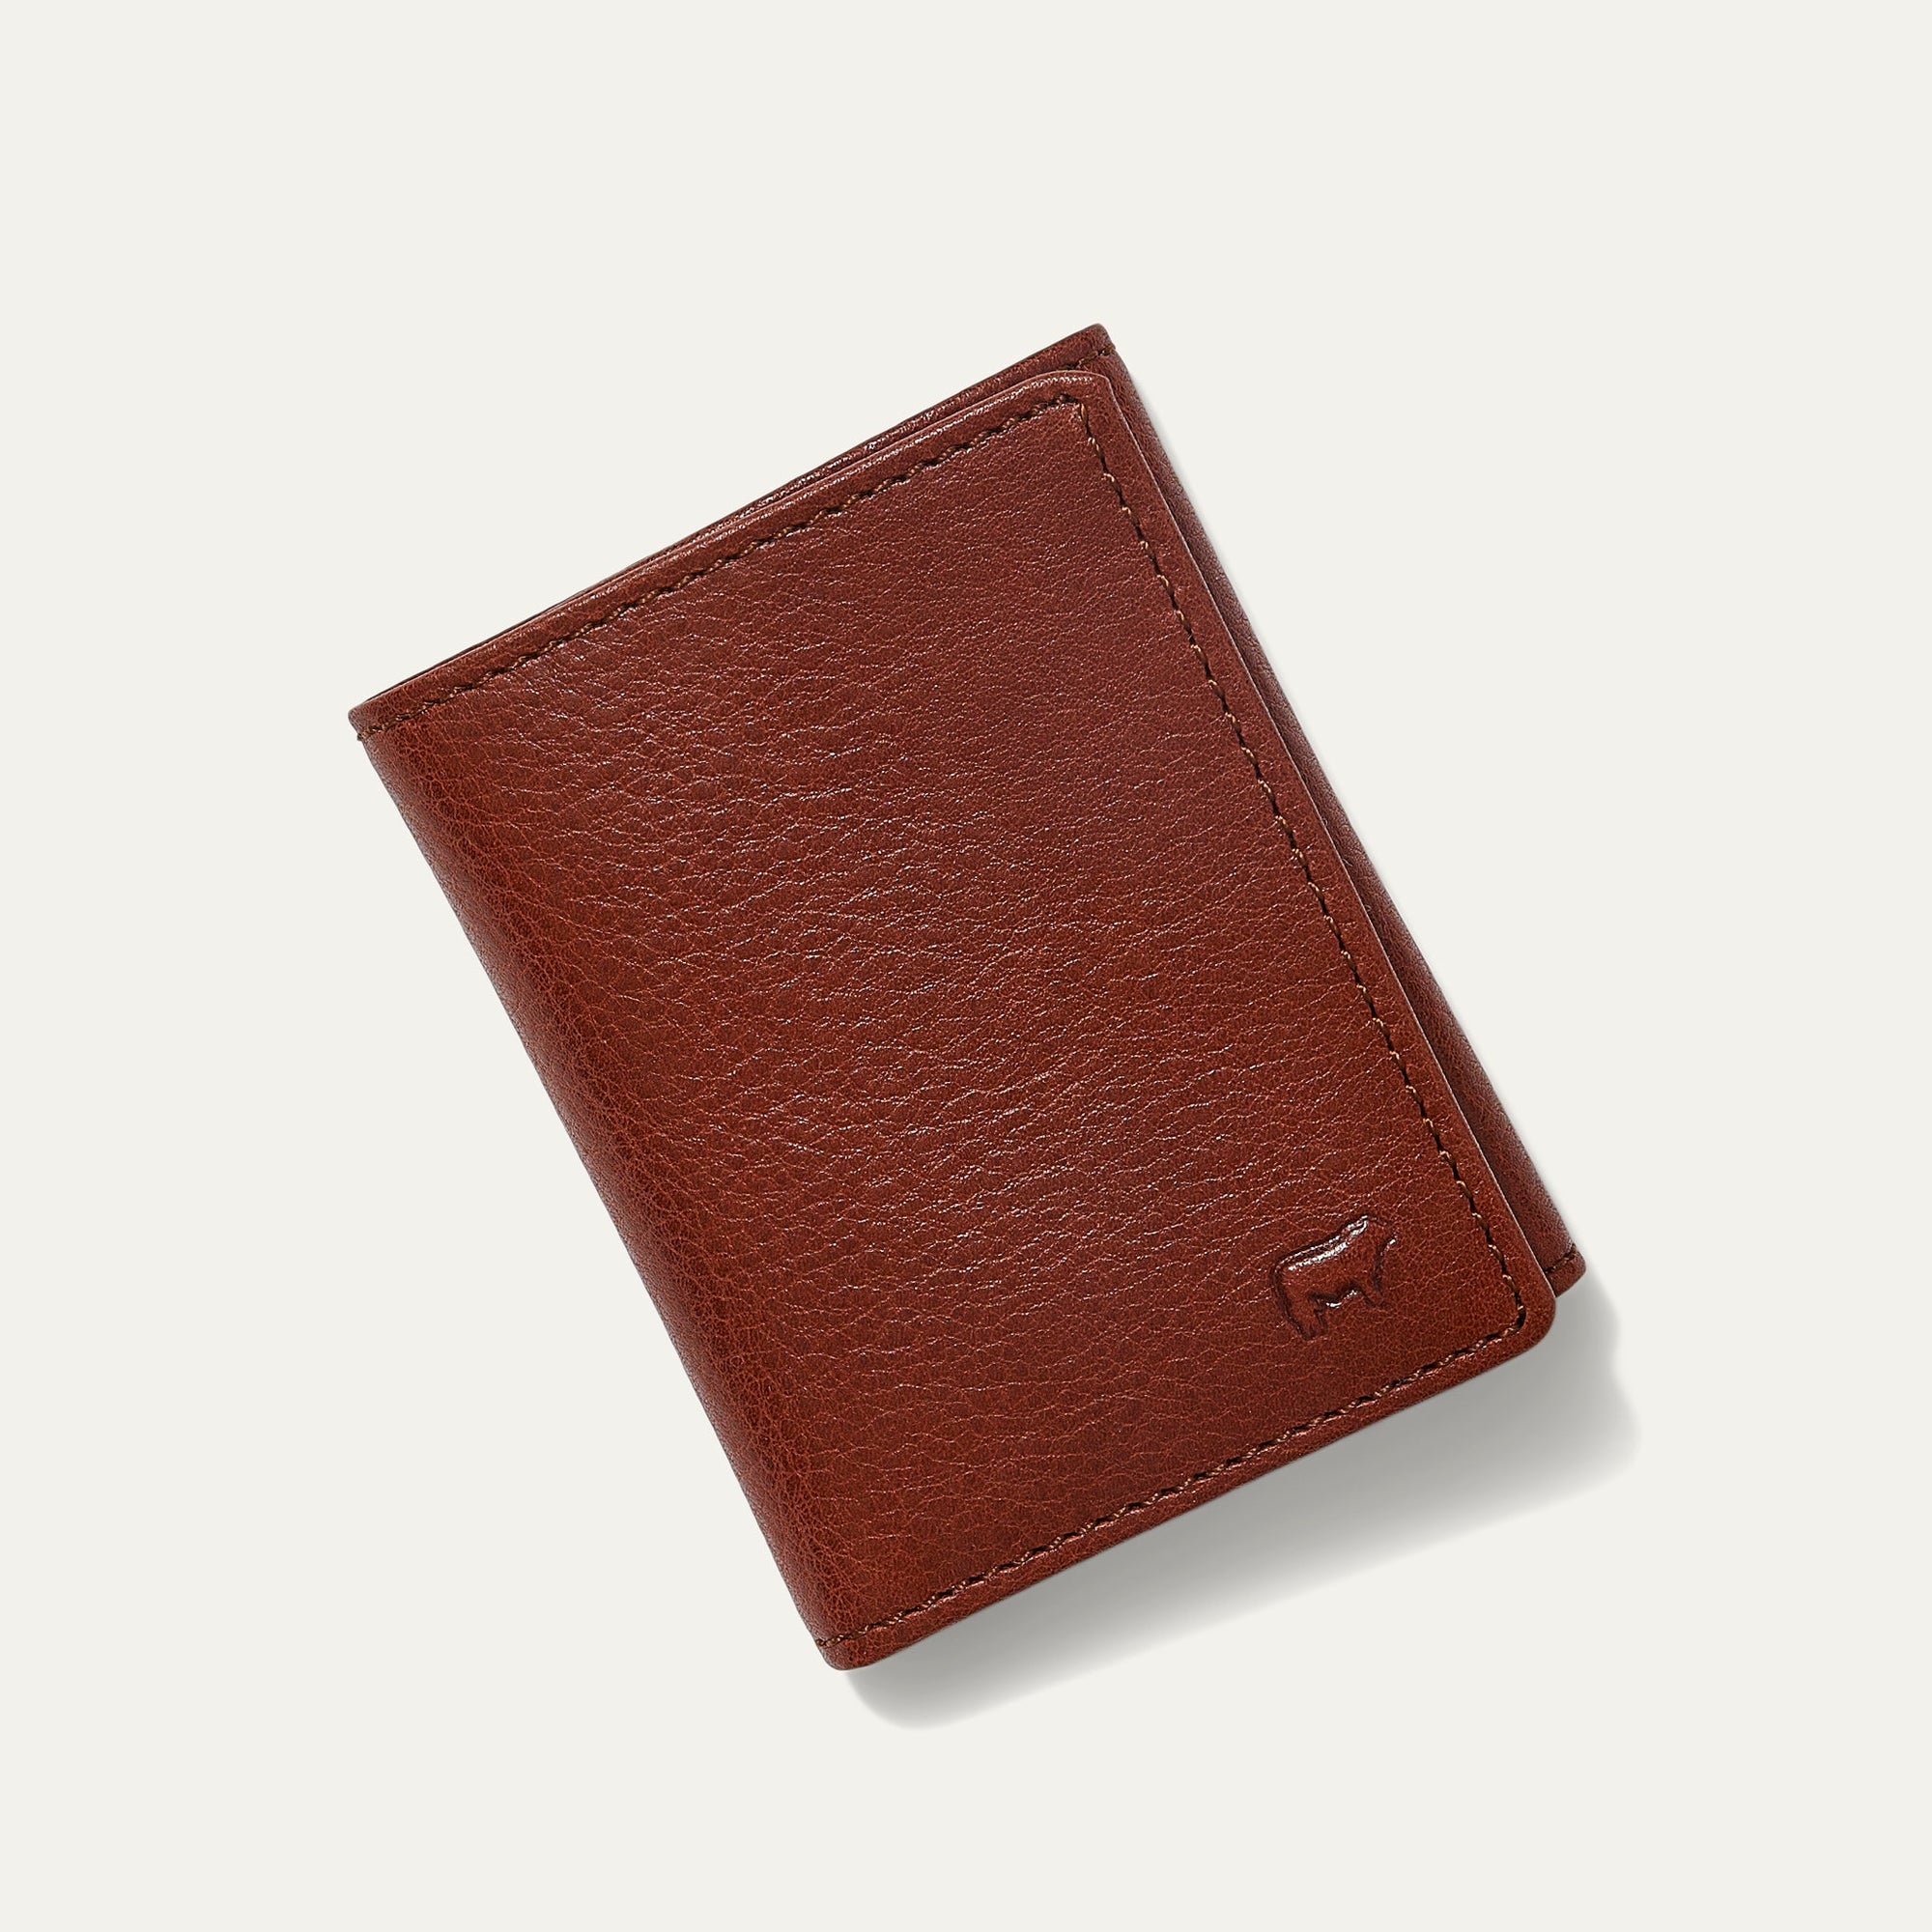 Classic Trifold Leather Wallet in Cognac by Will Leather Goods